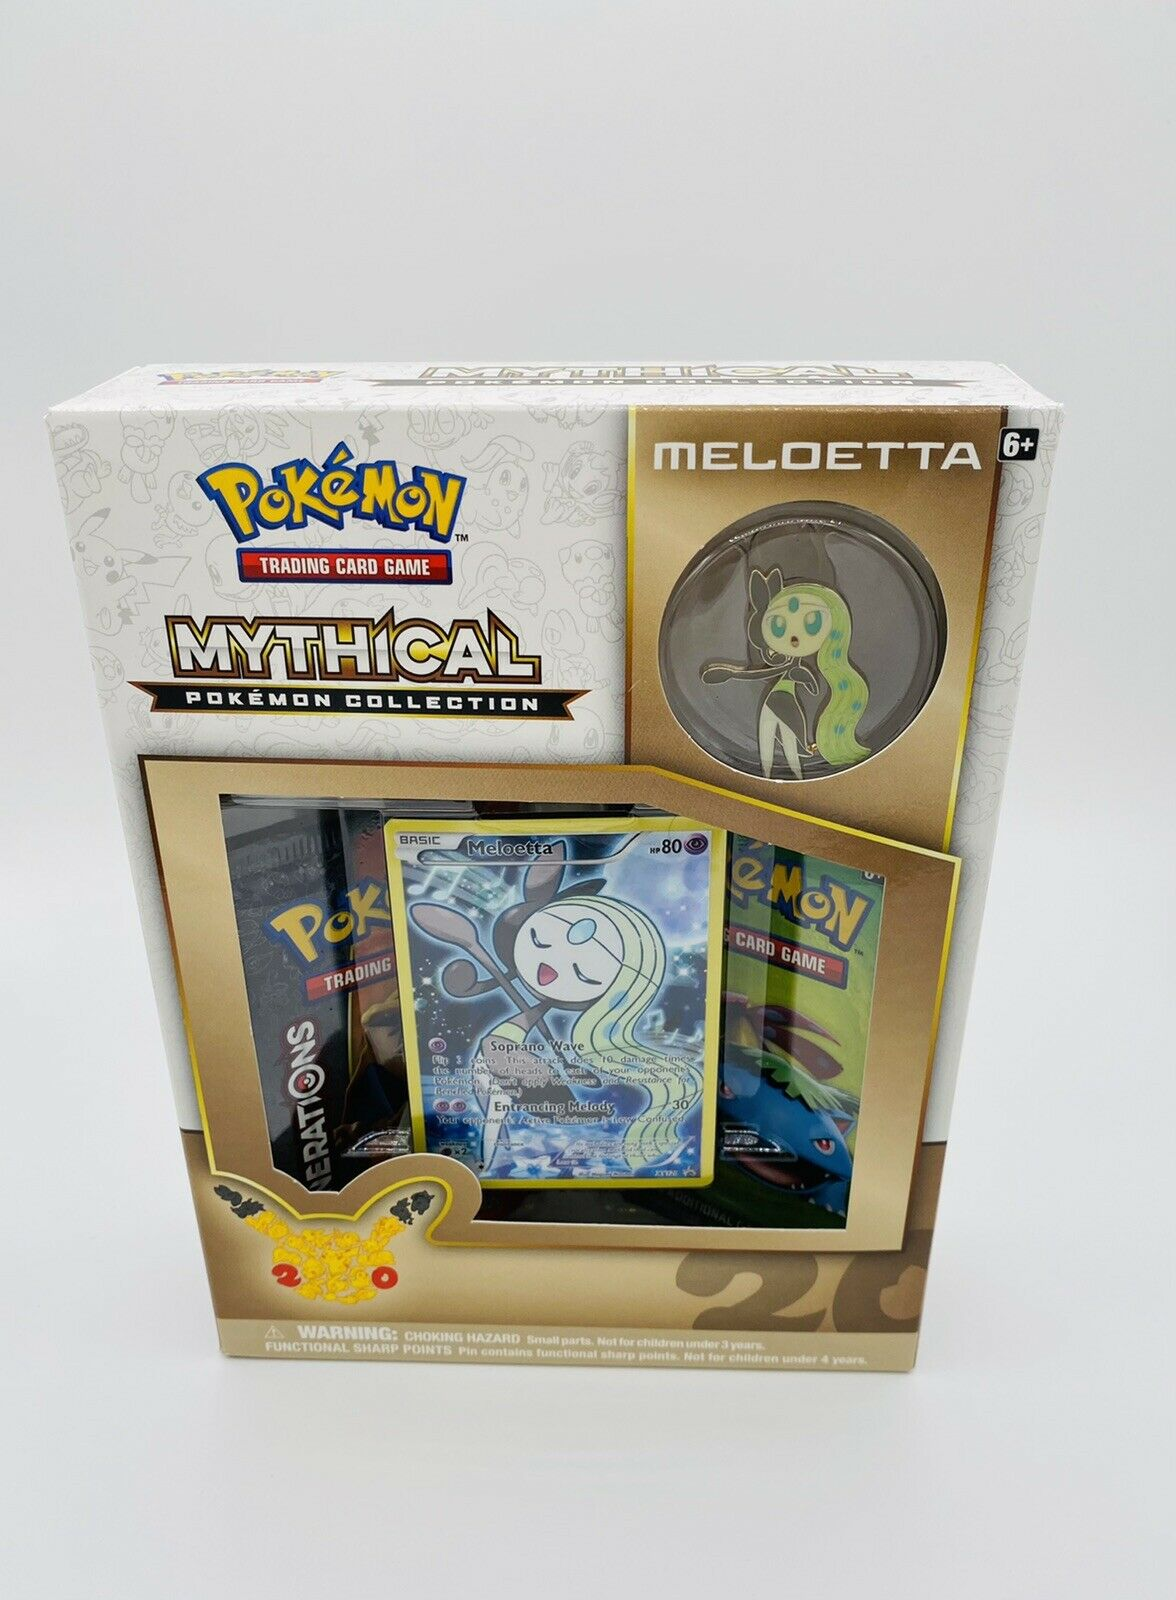 Pokemon Mythical Collection - Meloetta